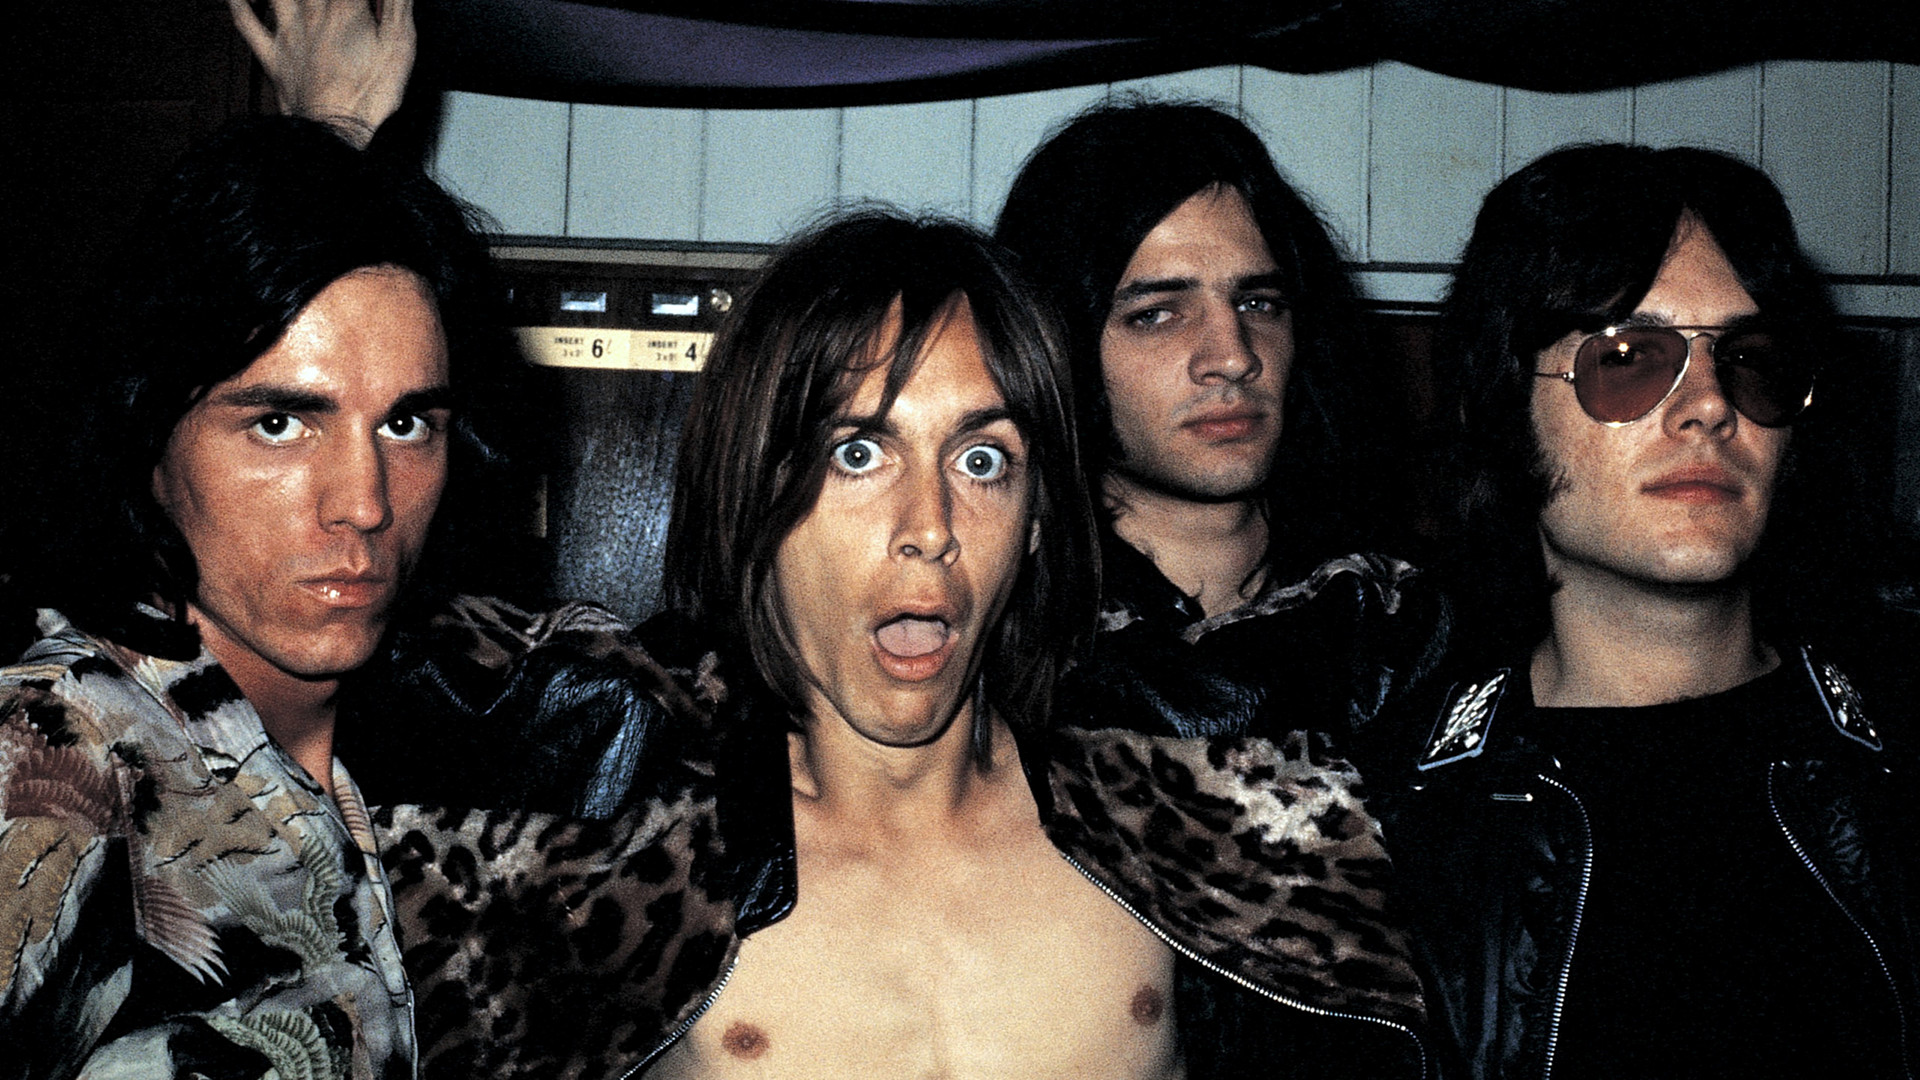 Search And Destroy av Iggy And The Stooges